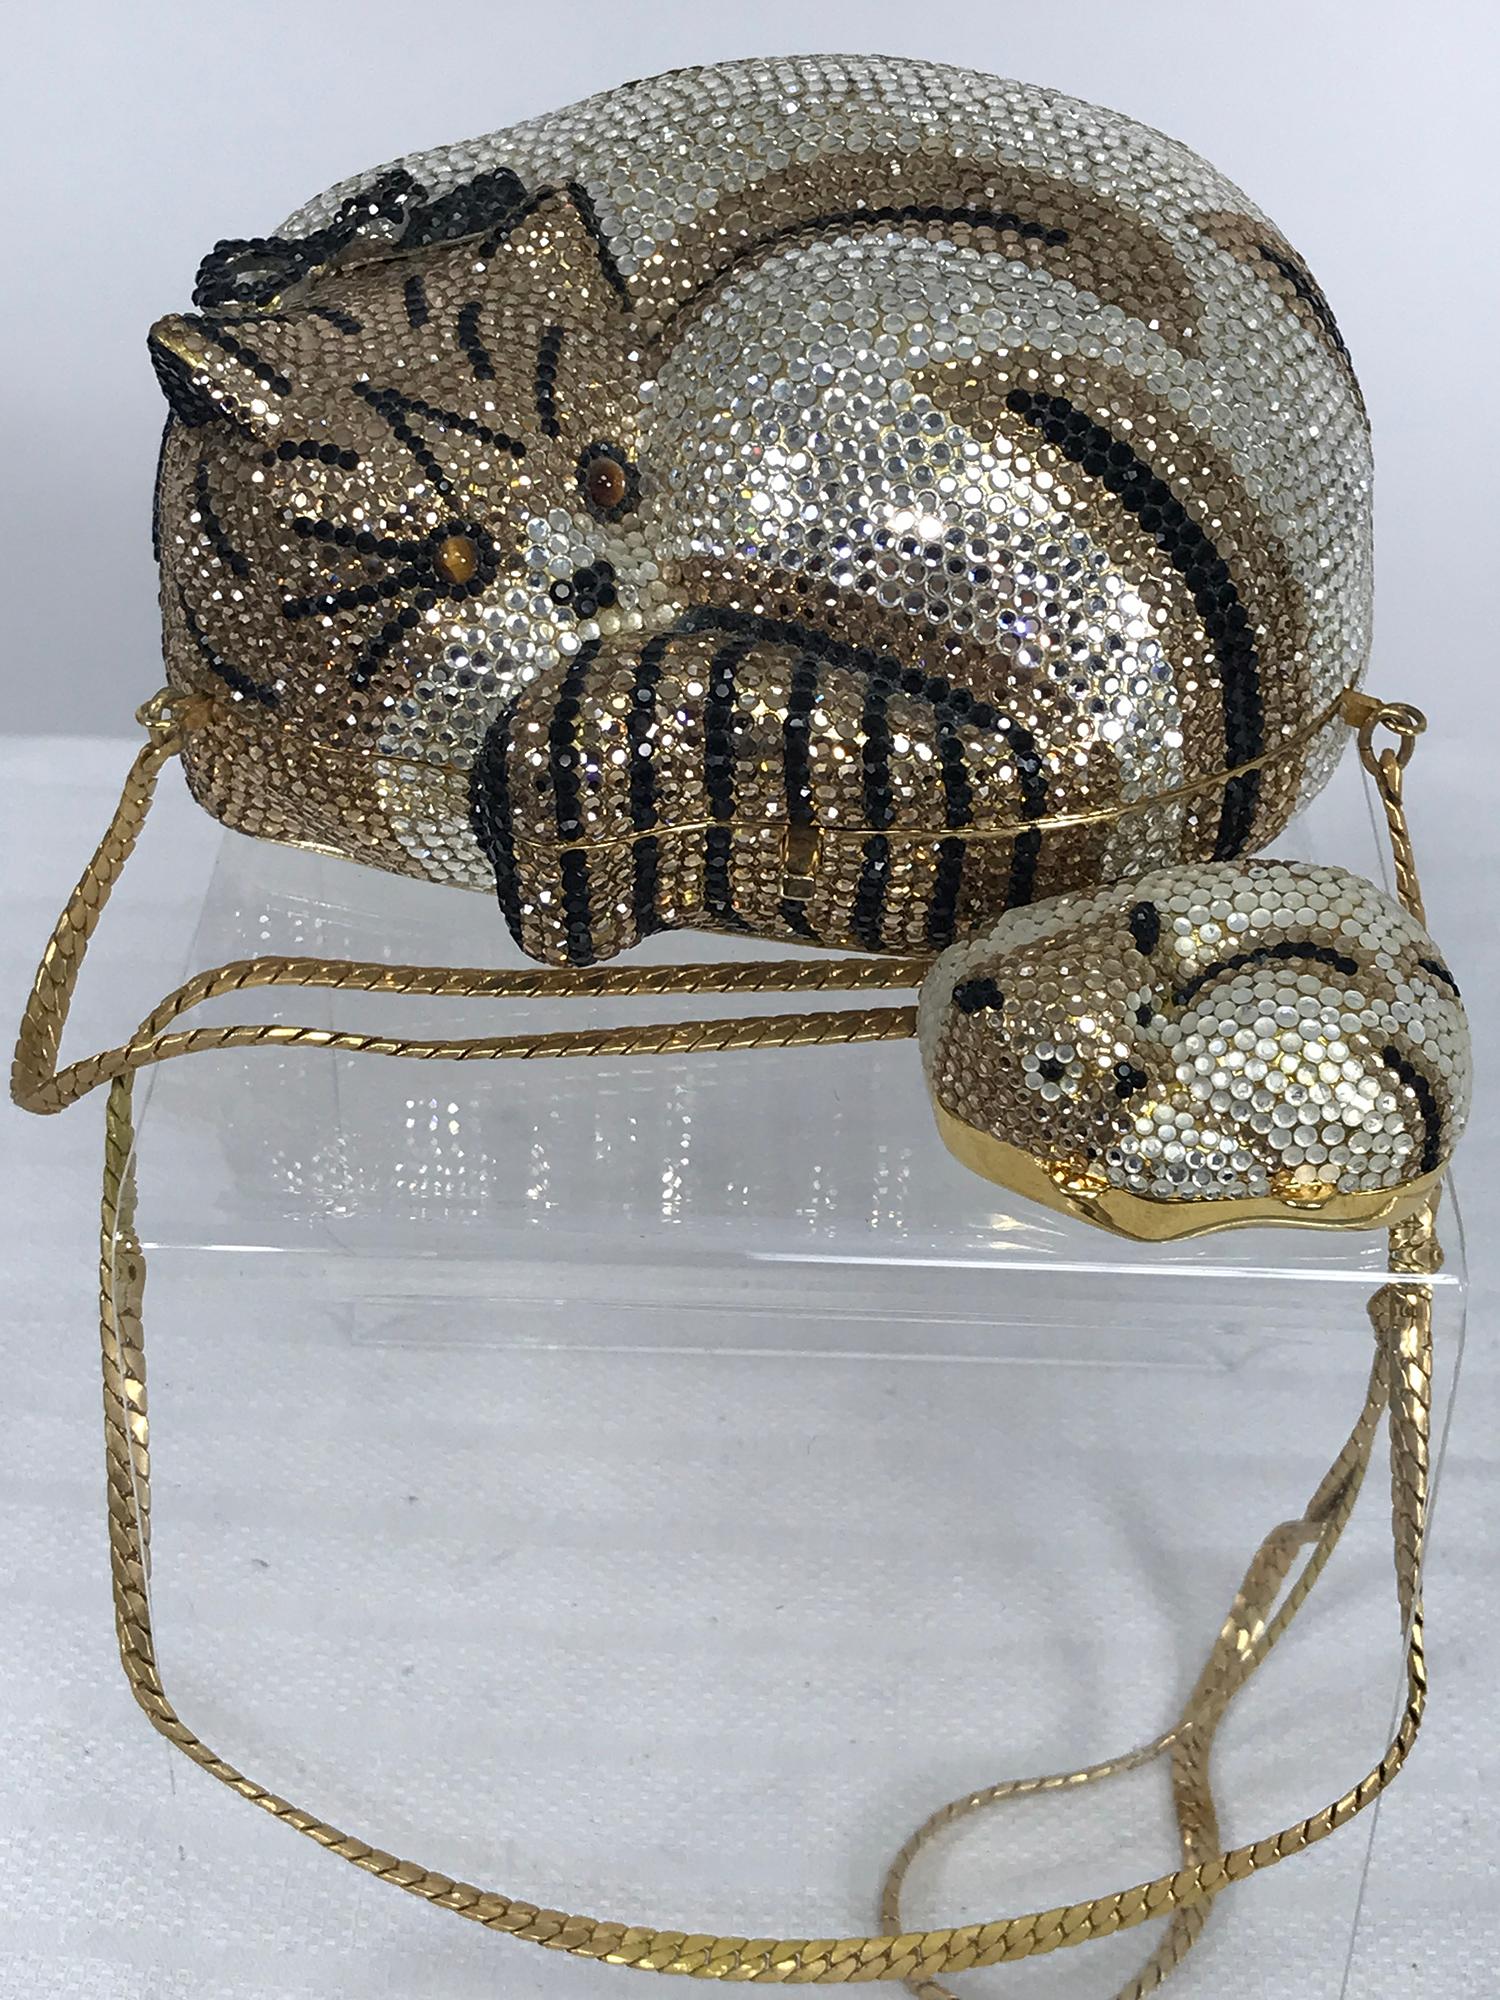 Swarovski crystal rhinestone encrusted mamma cat & kitten evening handbag, shoulder bag. Beautiful jeweled evening bag covered in crystal, gold and black Swarovski crystals, the bag is in the shape of a curled up cat with tiger eyes, it opens to an